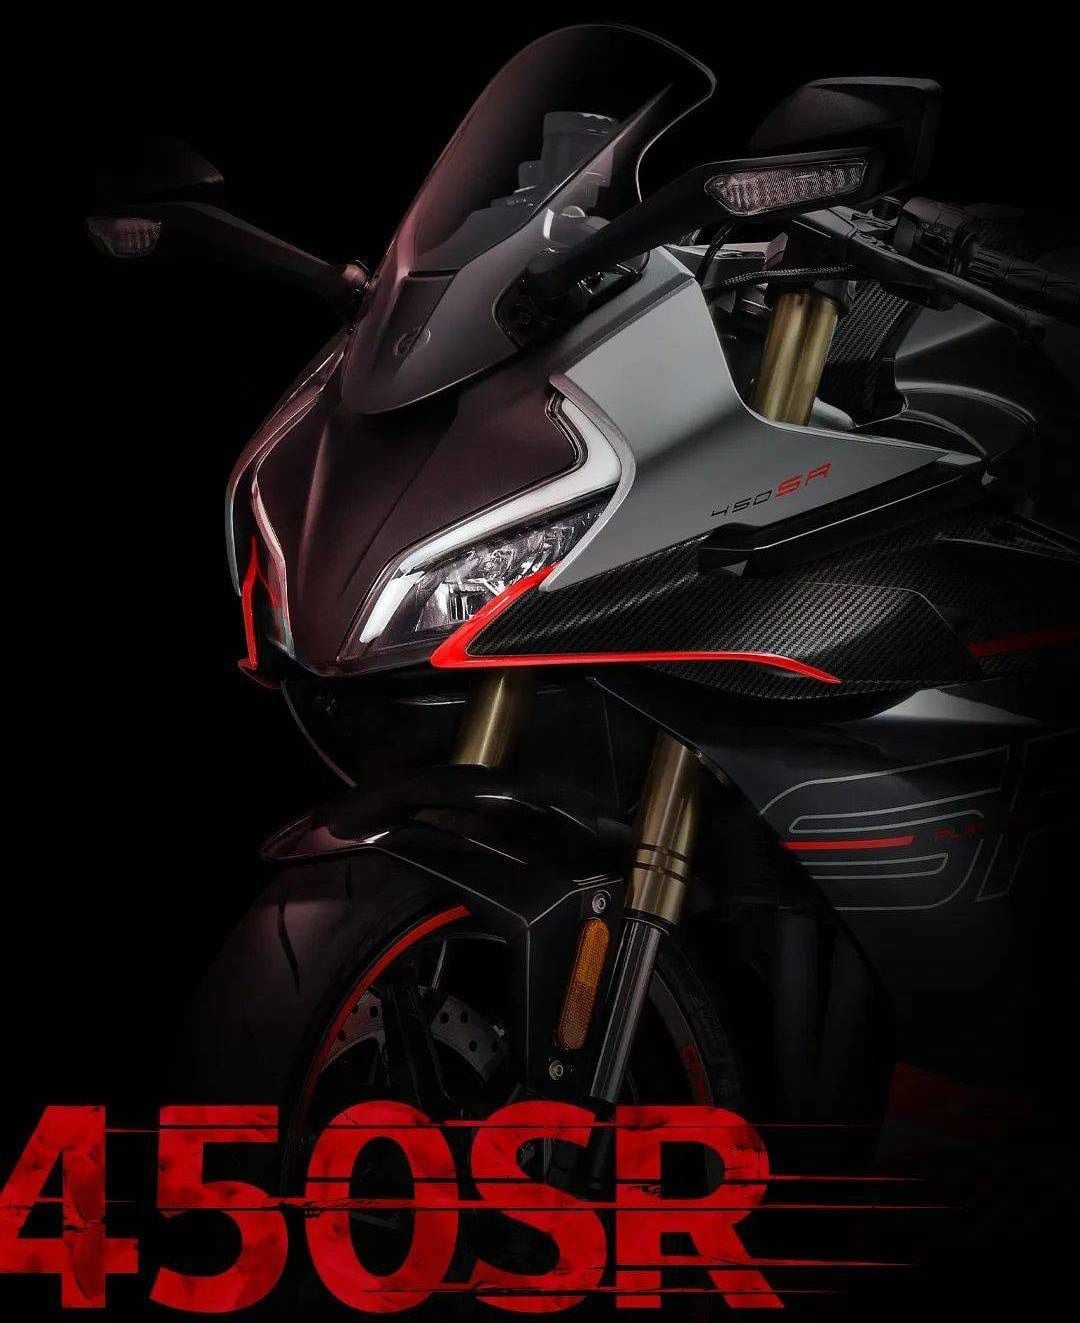 CFMoto’s lightweight 450SR model is making its official debut in China.